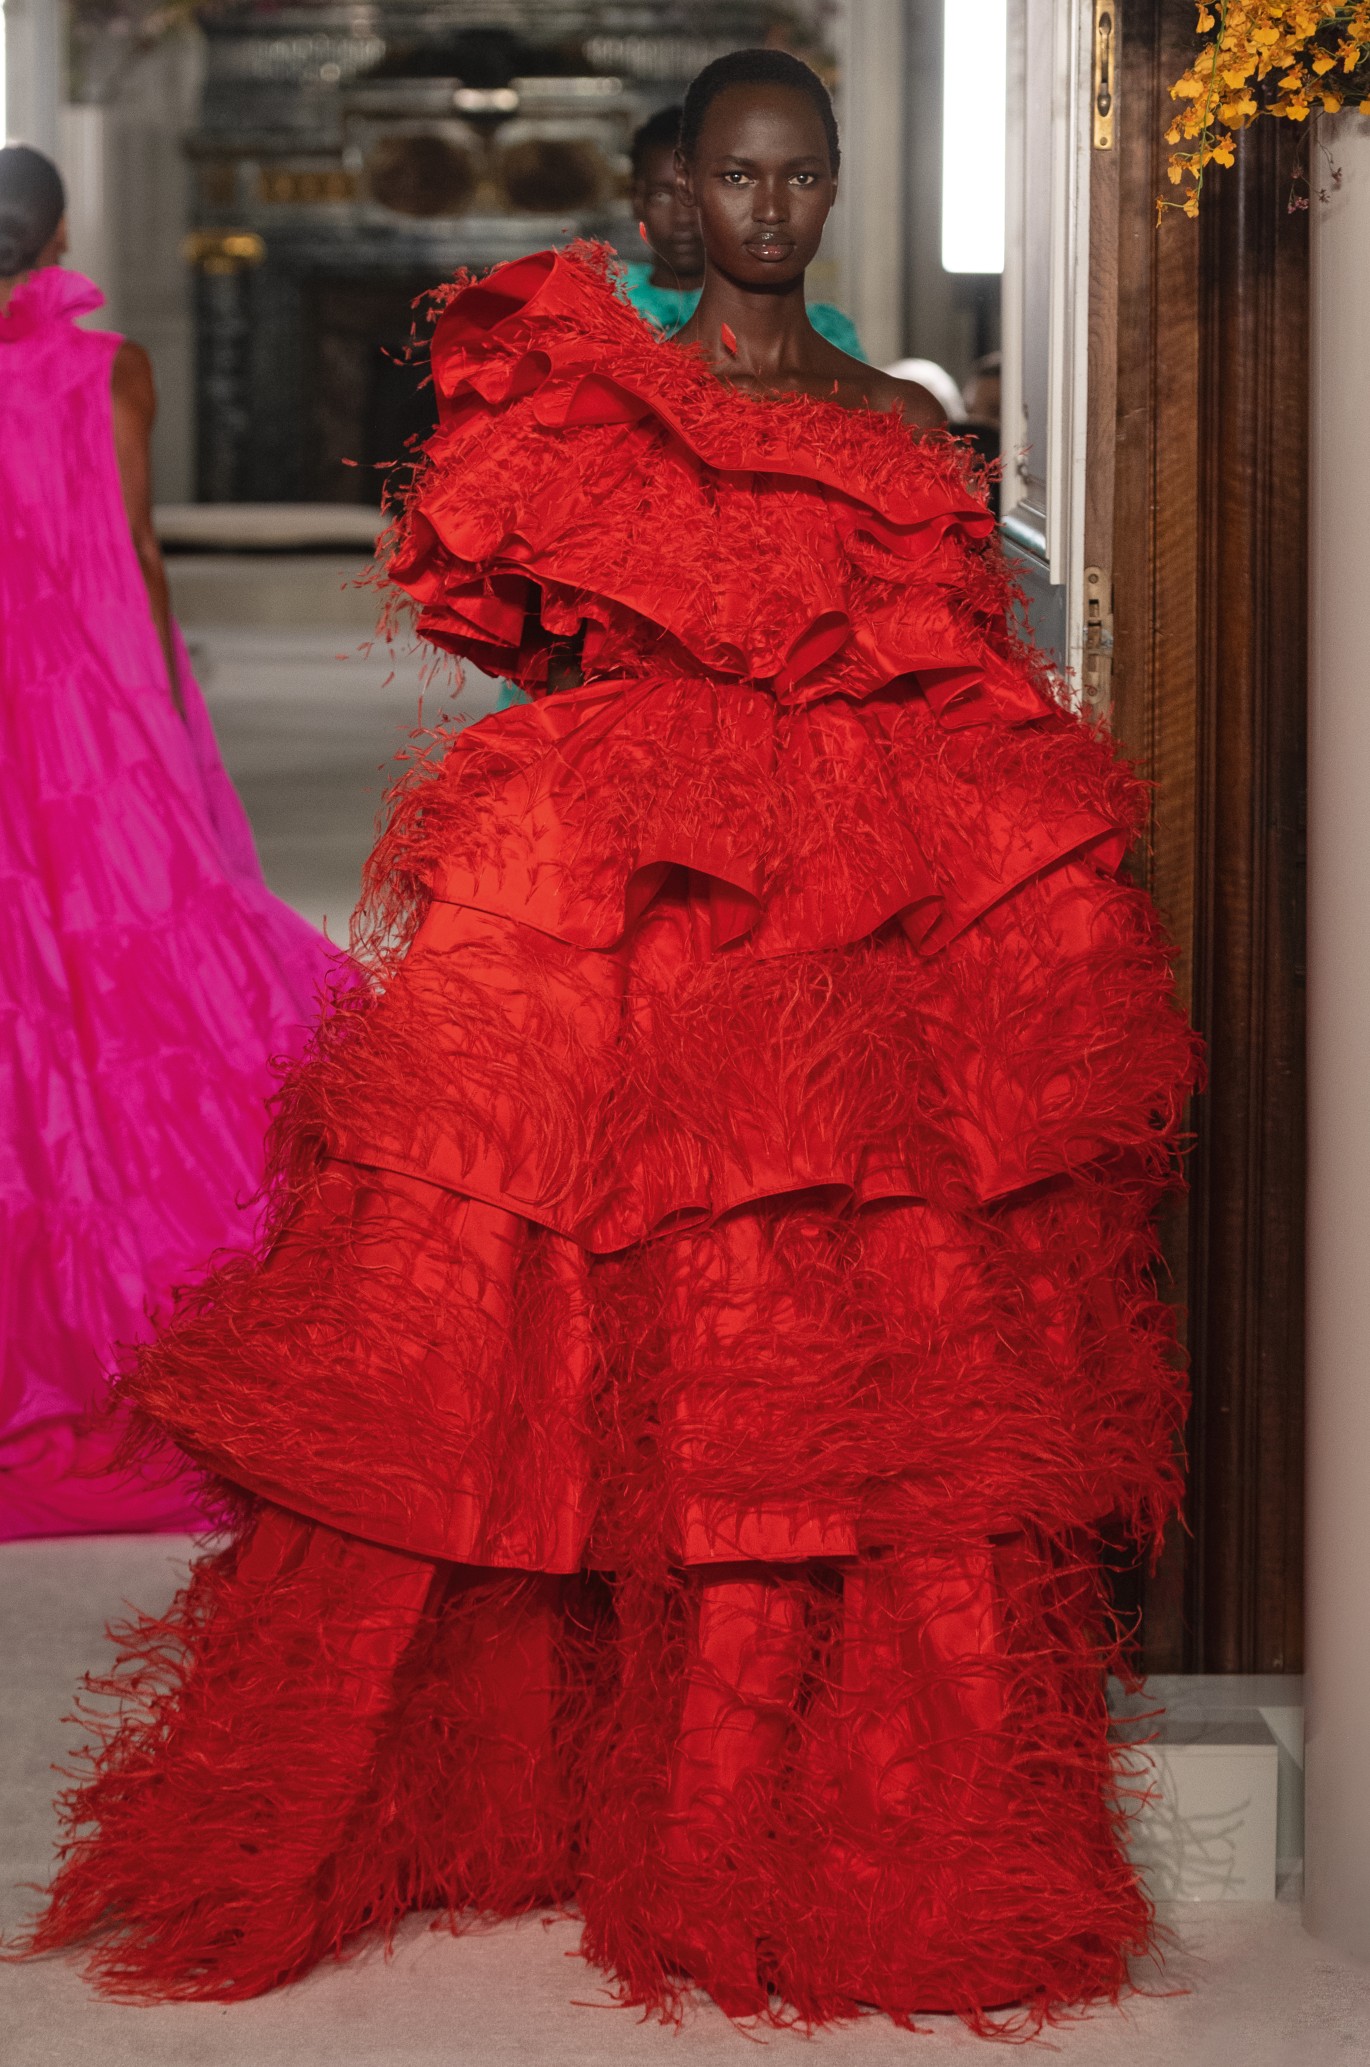 Spring 2019 Haute Couture: Valentino's Flowers — CoutureNotebook